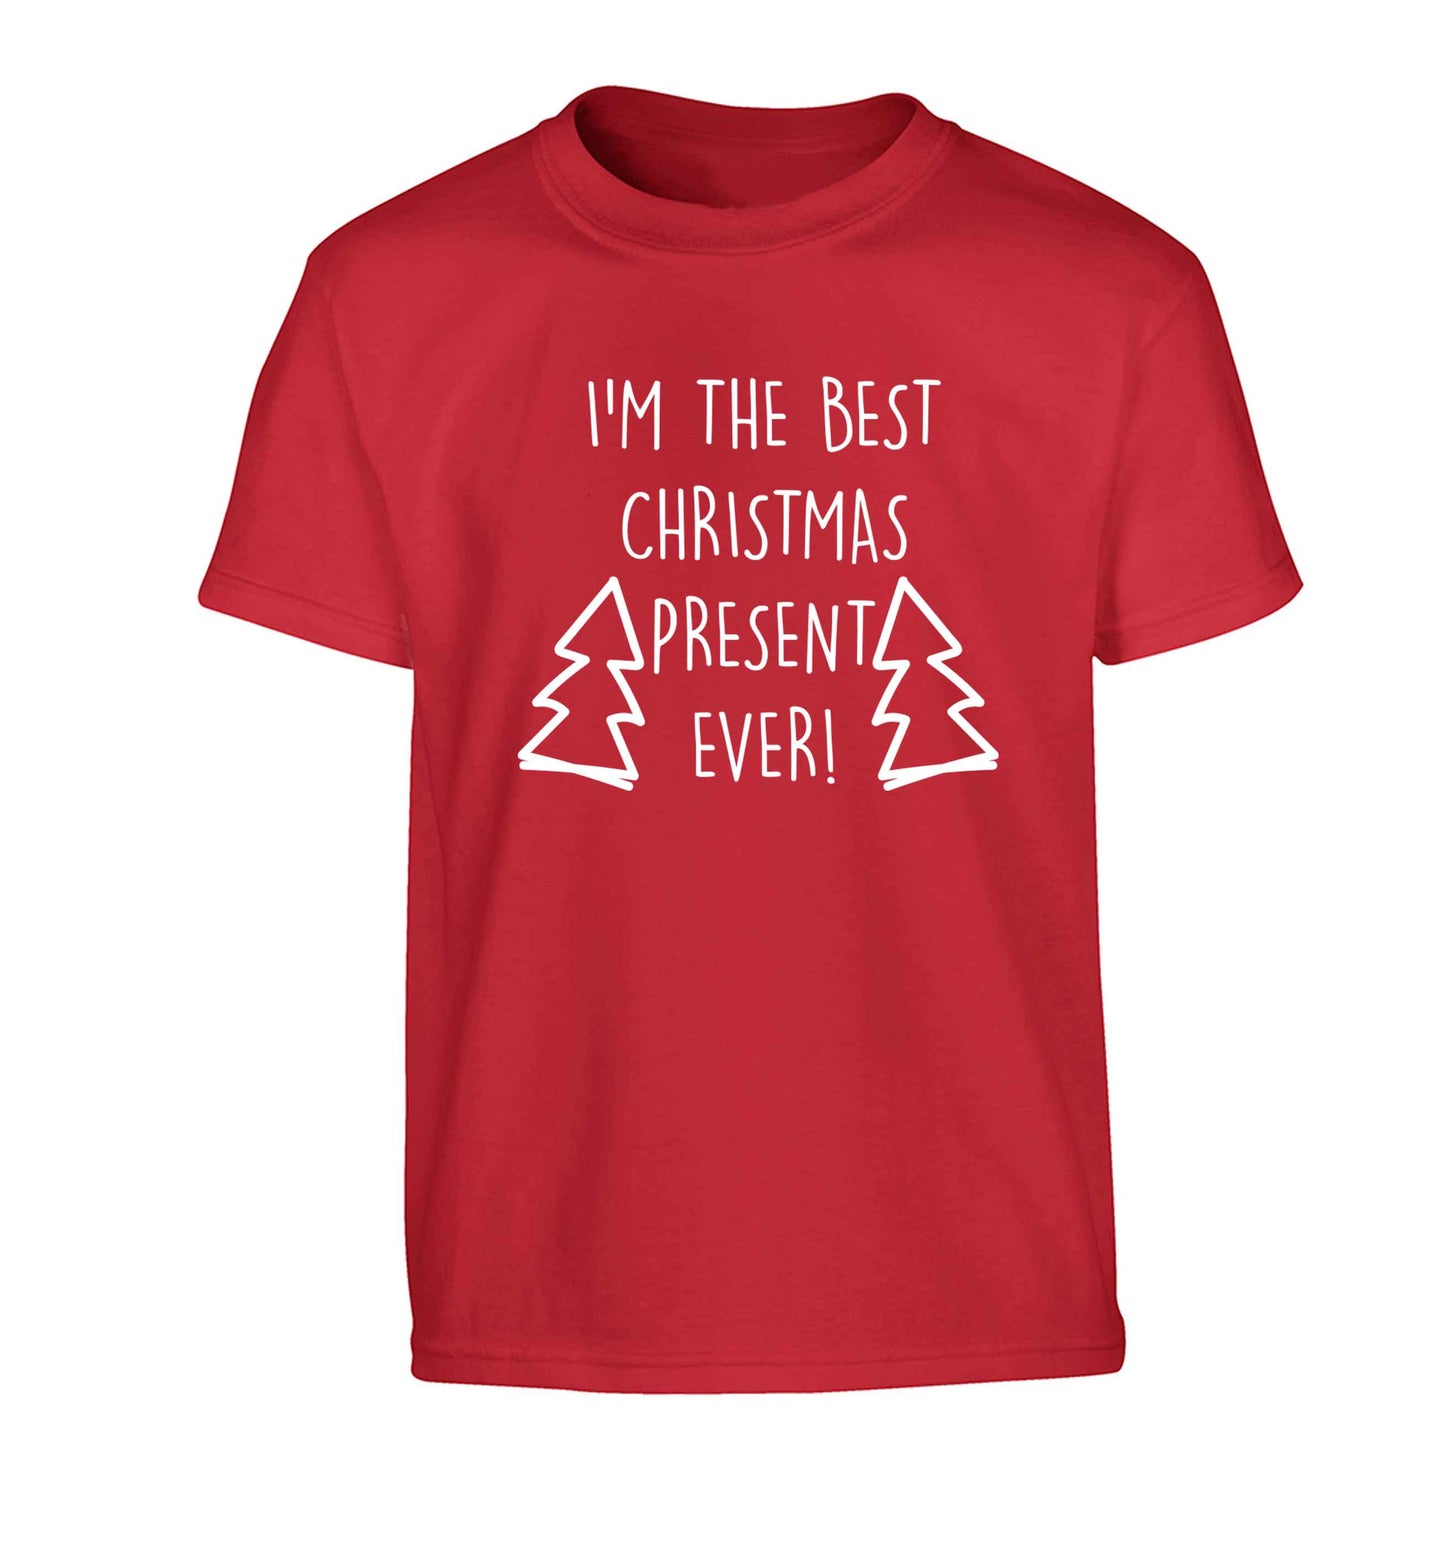 I'm the best Christmas present ever Children's red Tshirt 12-13 Years